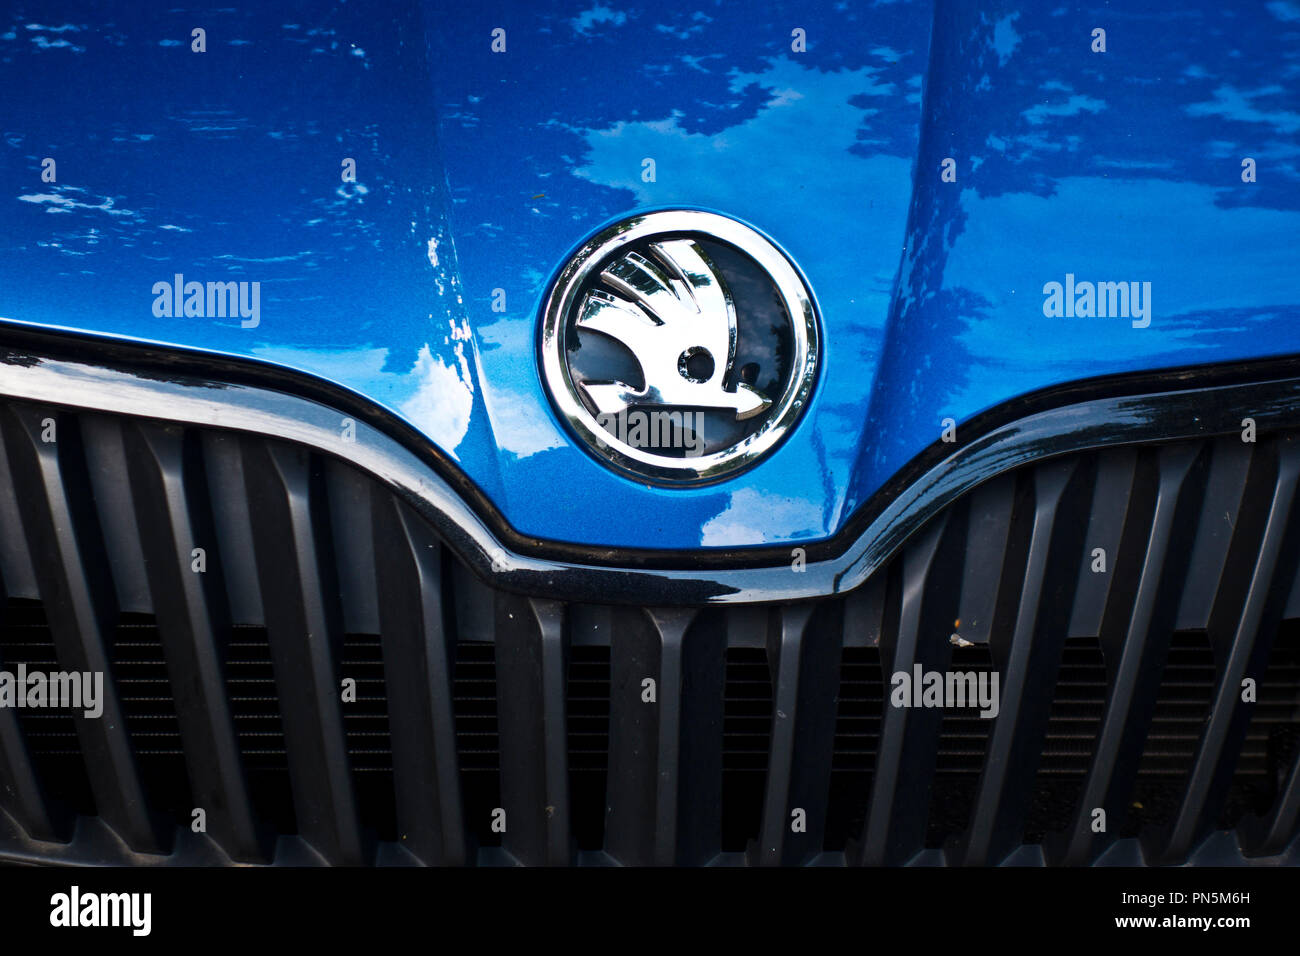 logo of Skoda on the grille of a blue car Stock Photo